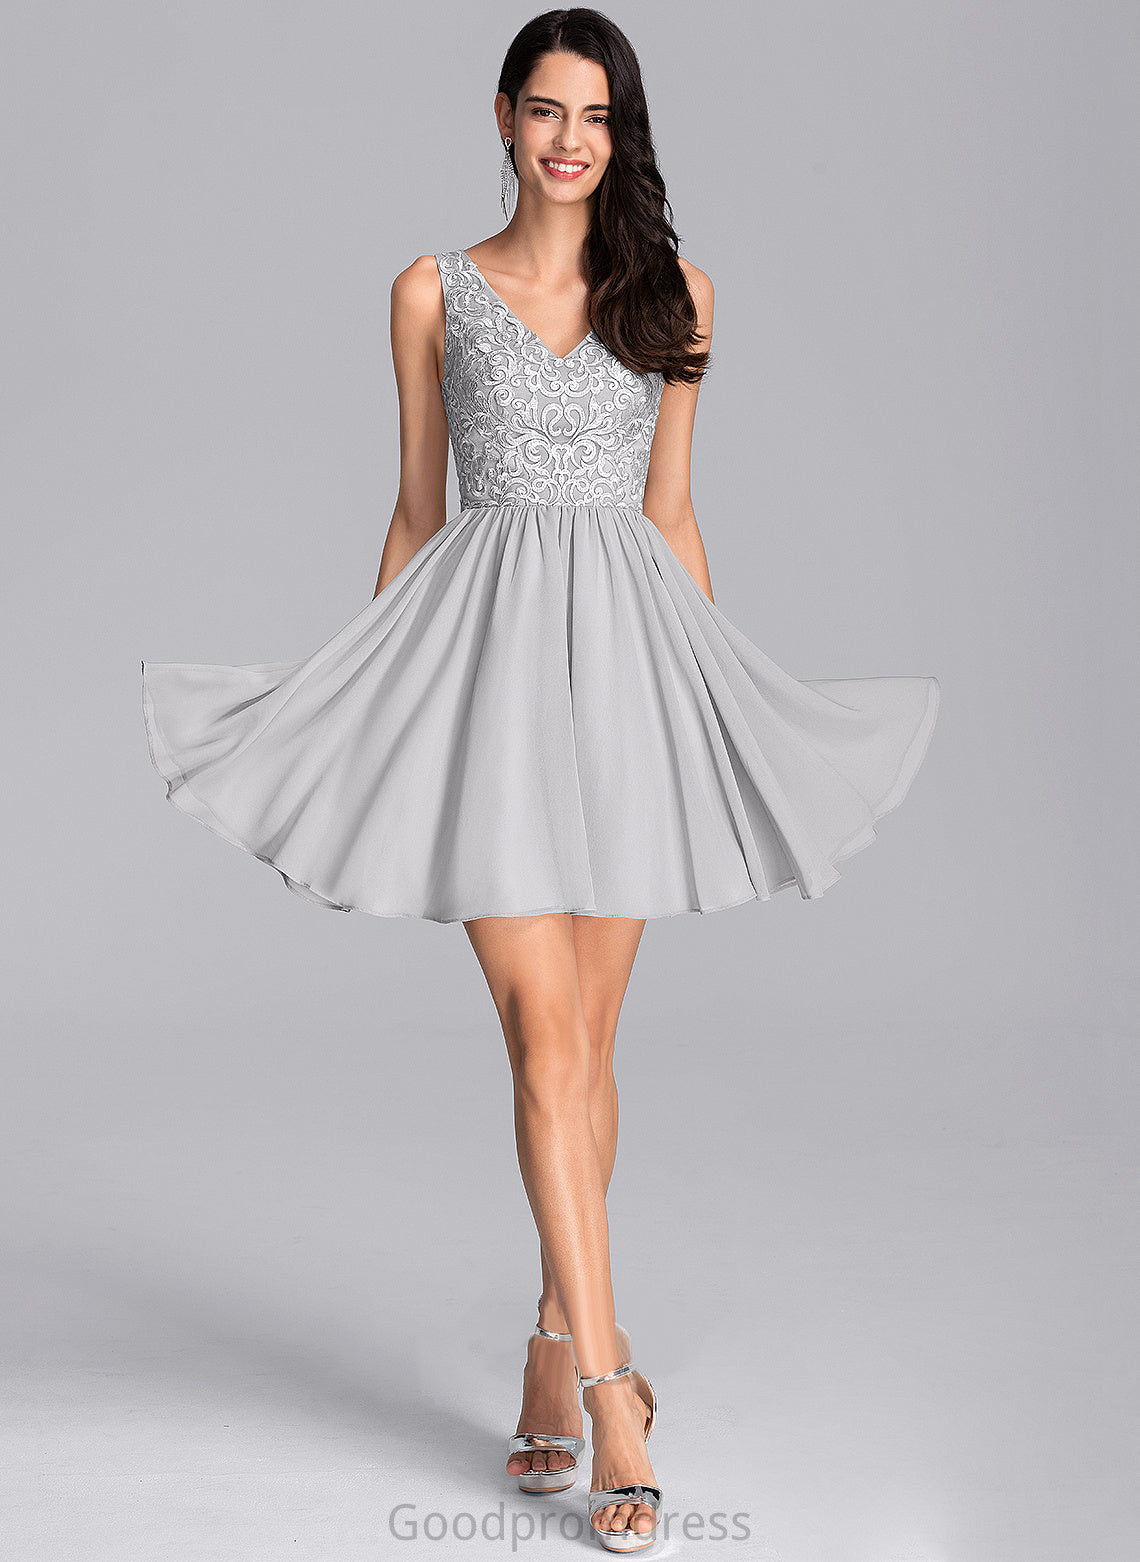 Homecoming V-neck Chiffon With Lace Homecoming Dresses Dylan Dress Sequins Short/Mini A-Line